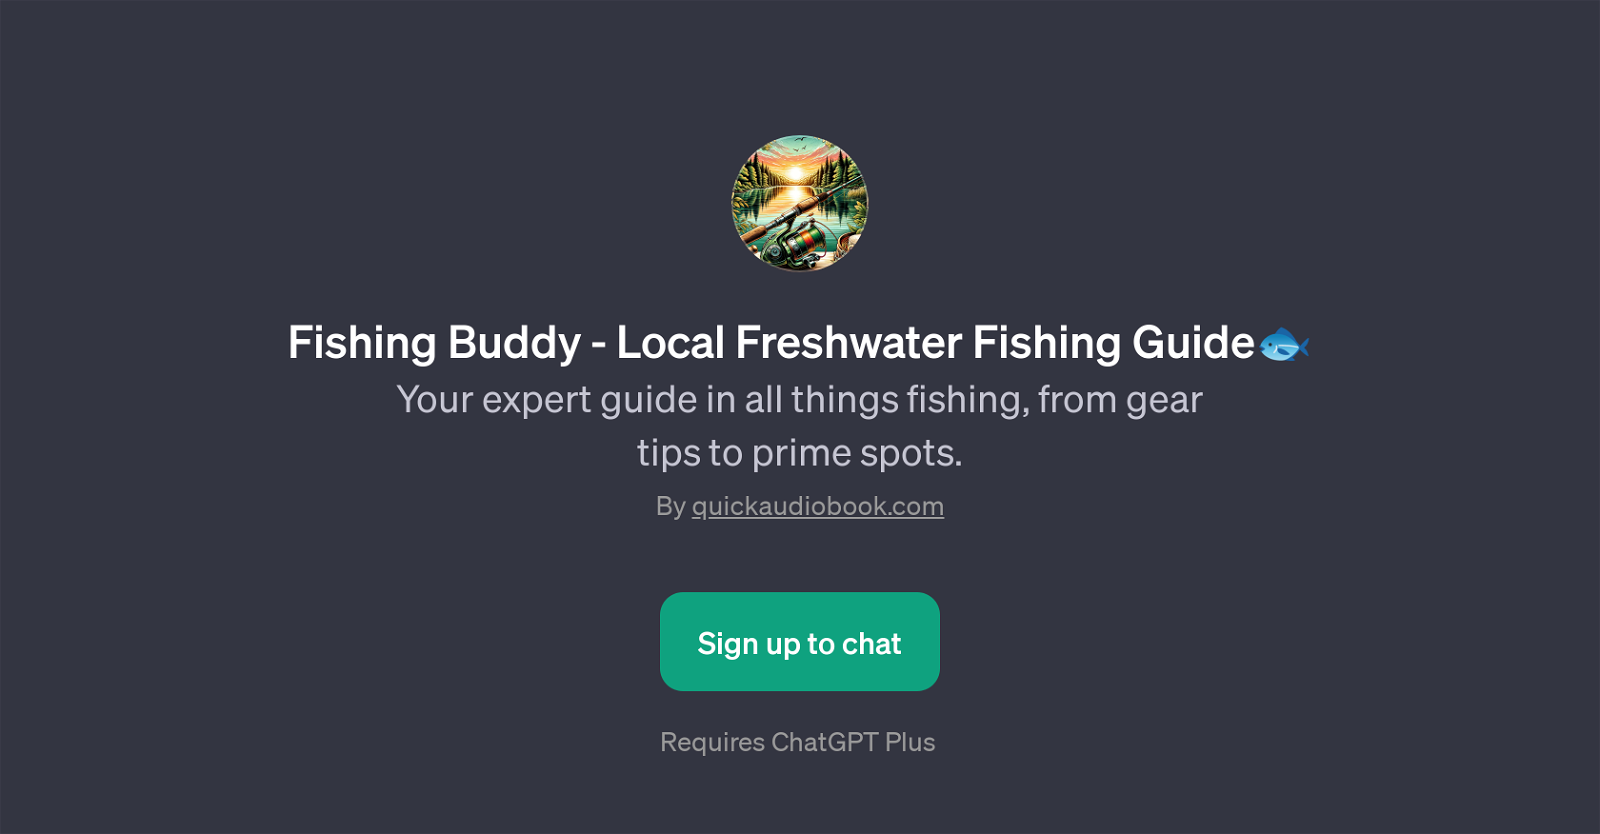 Fishing Buddy - Local Freshwater Fishing Guide And 7 Other AI Alternatives  For Fishing advice